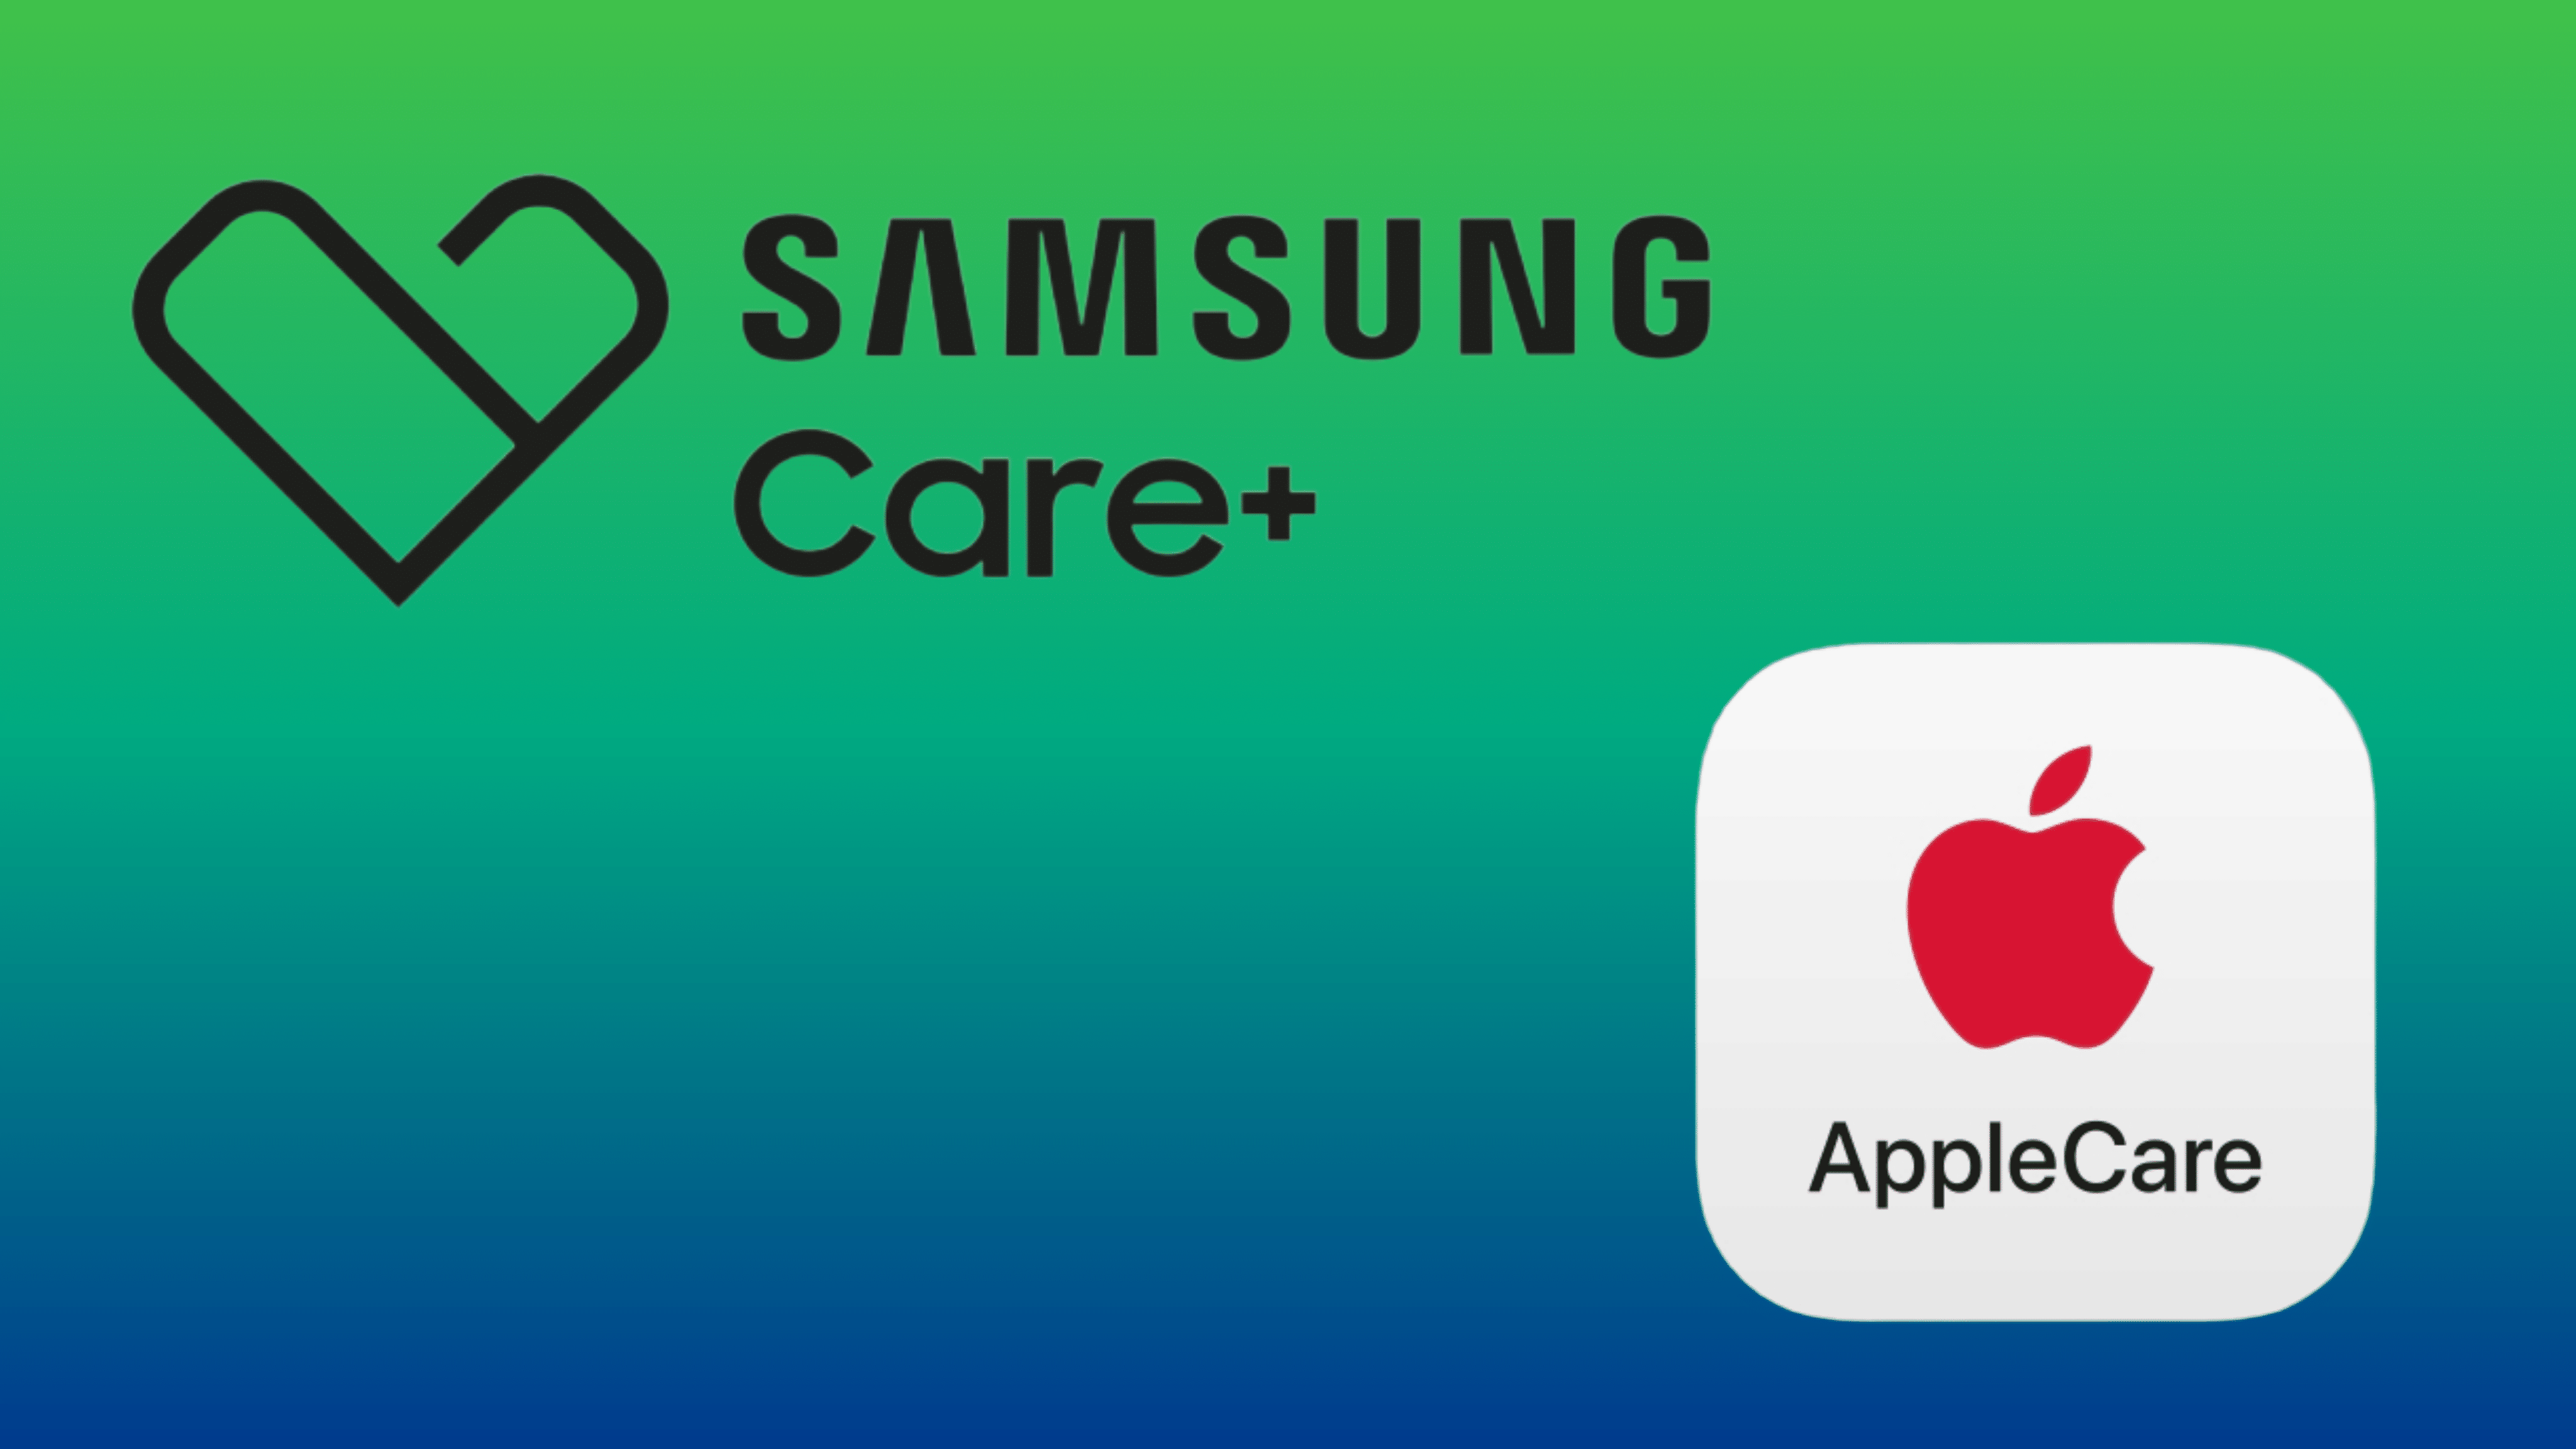 Samsung Care + and Apple Care